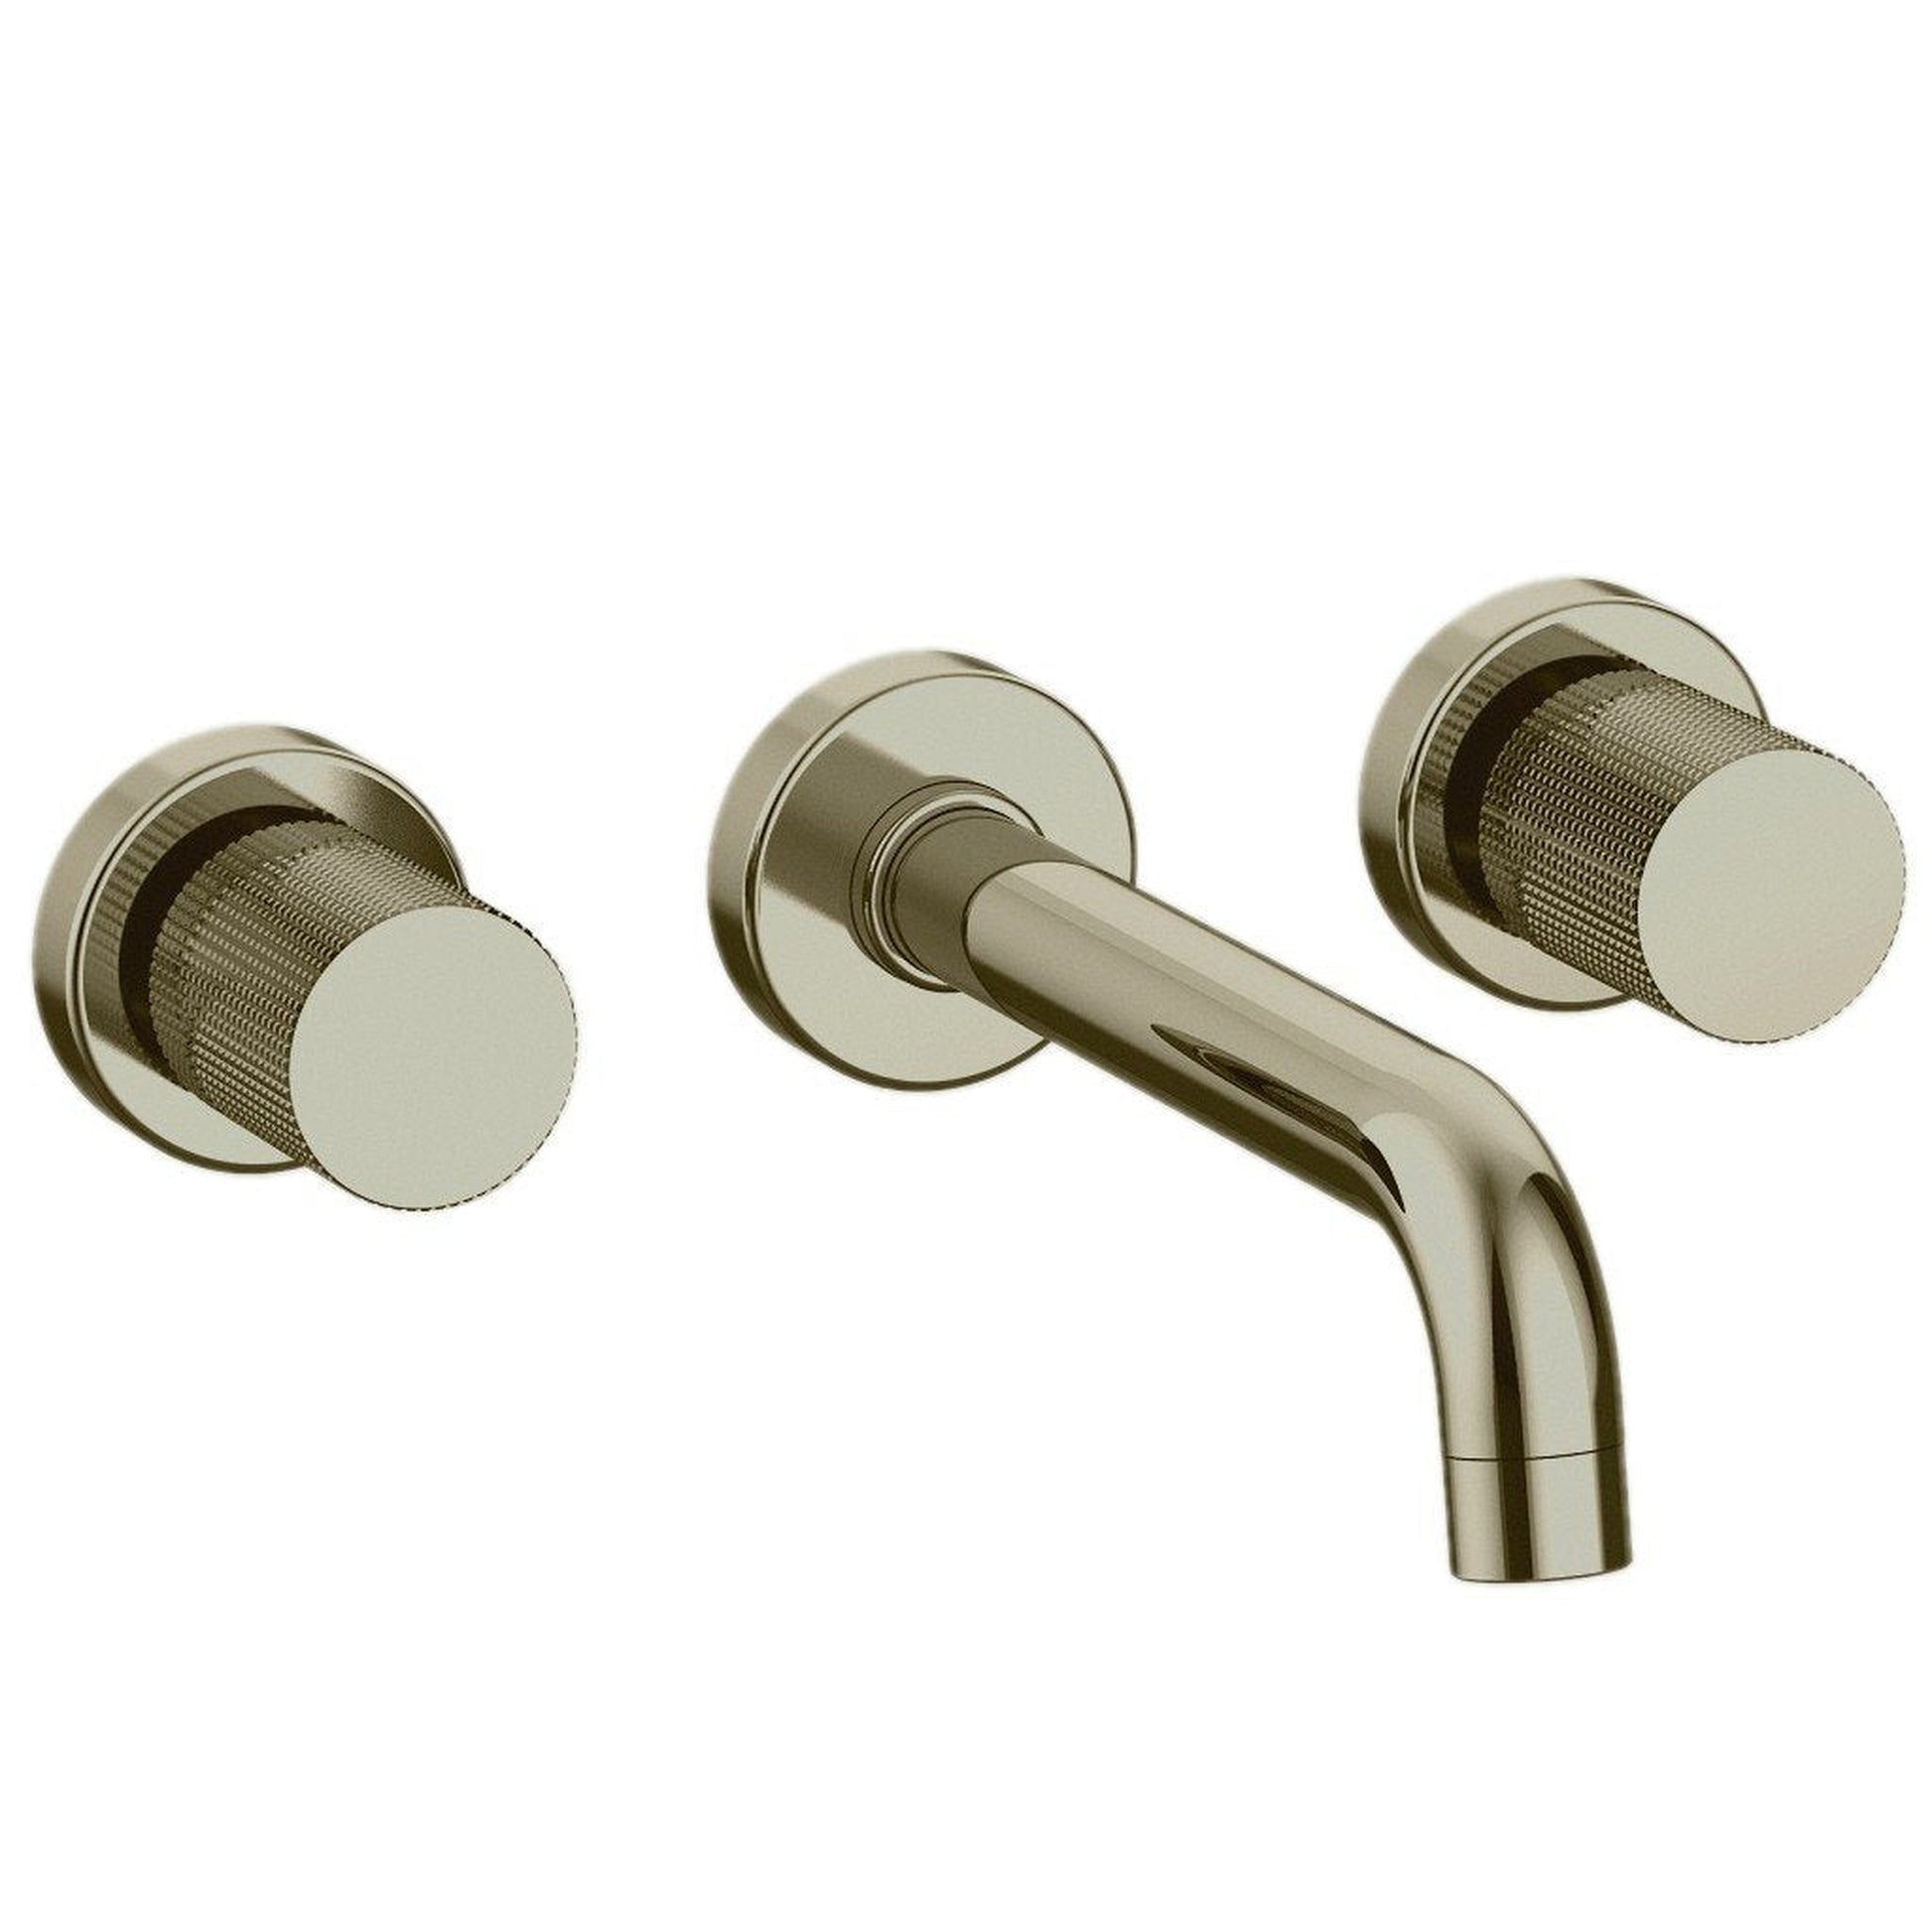 LaToscana Alessandra Brushed Nickel Wall-Mounted Lavatory Faucet With Grip Handles